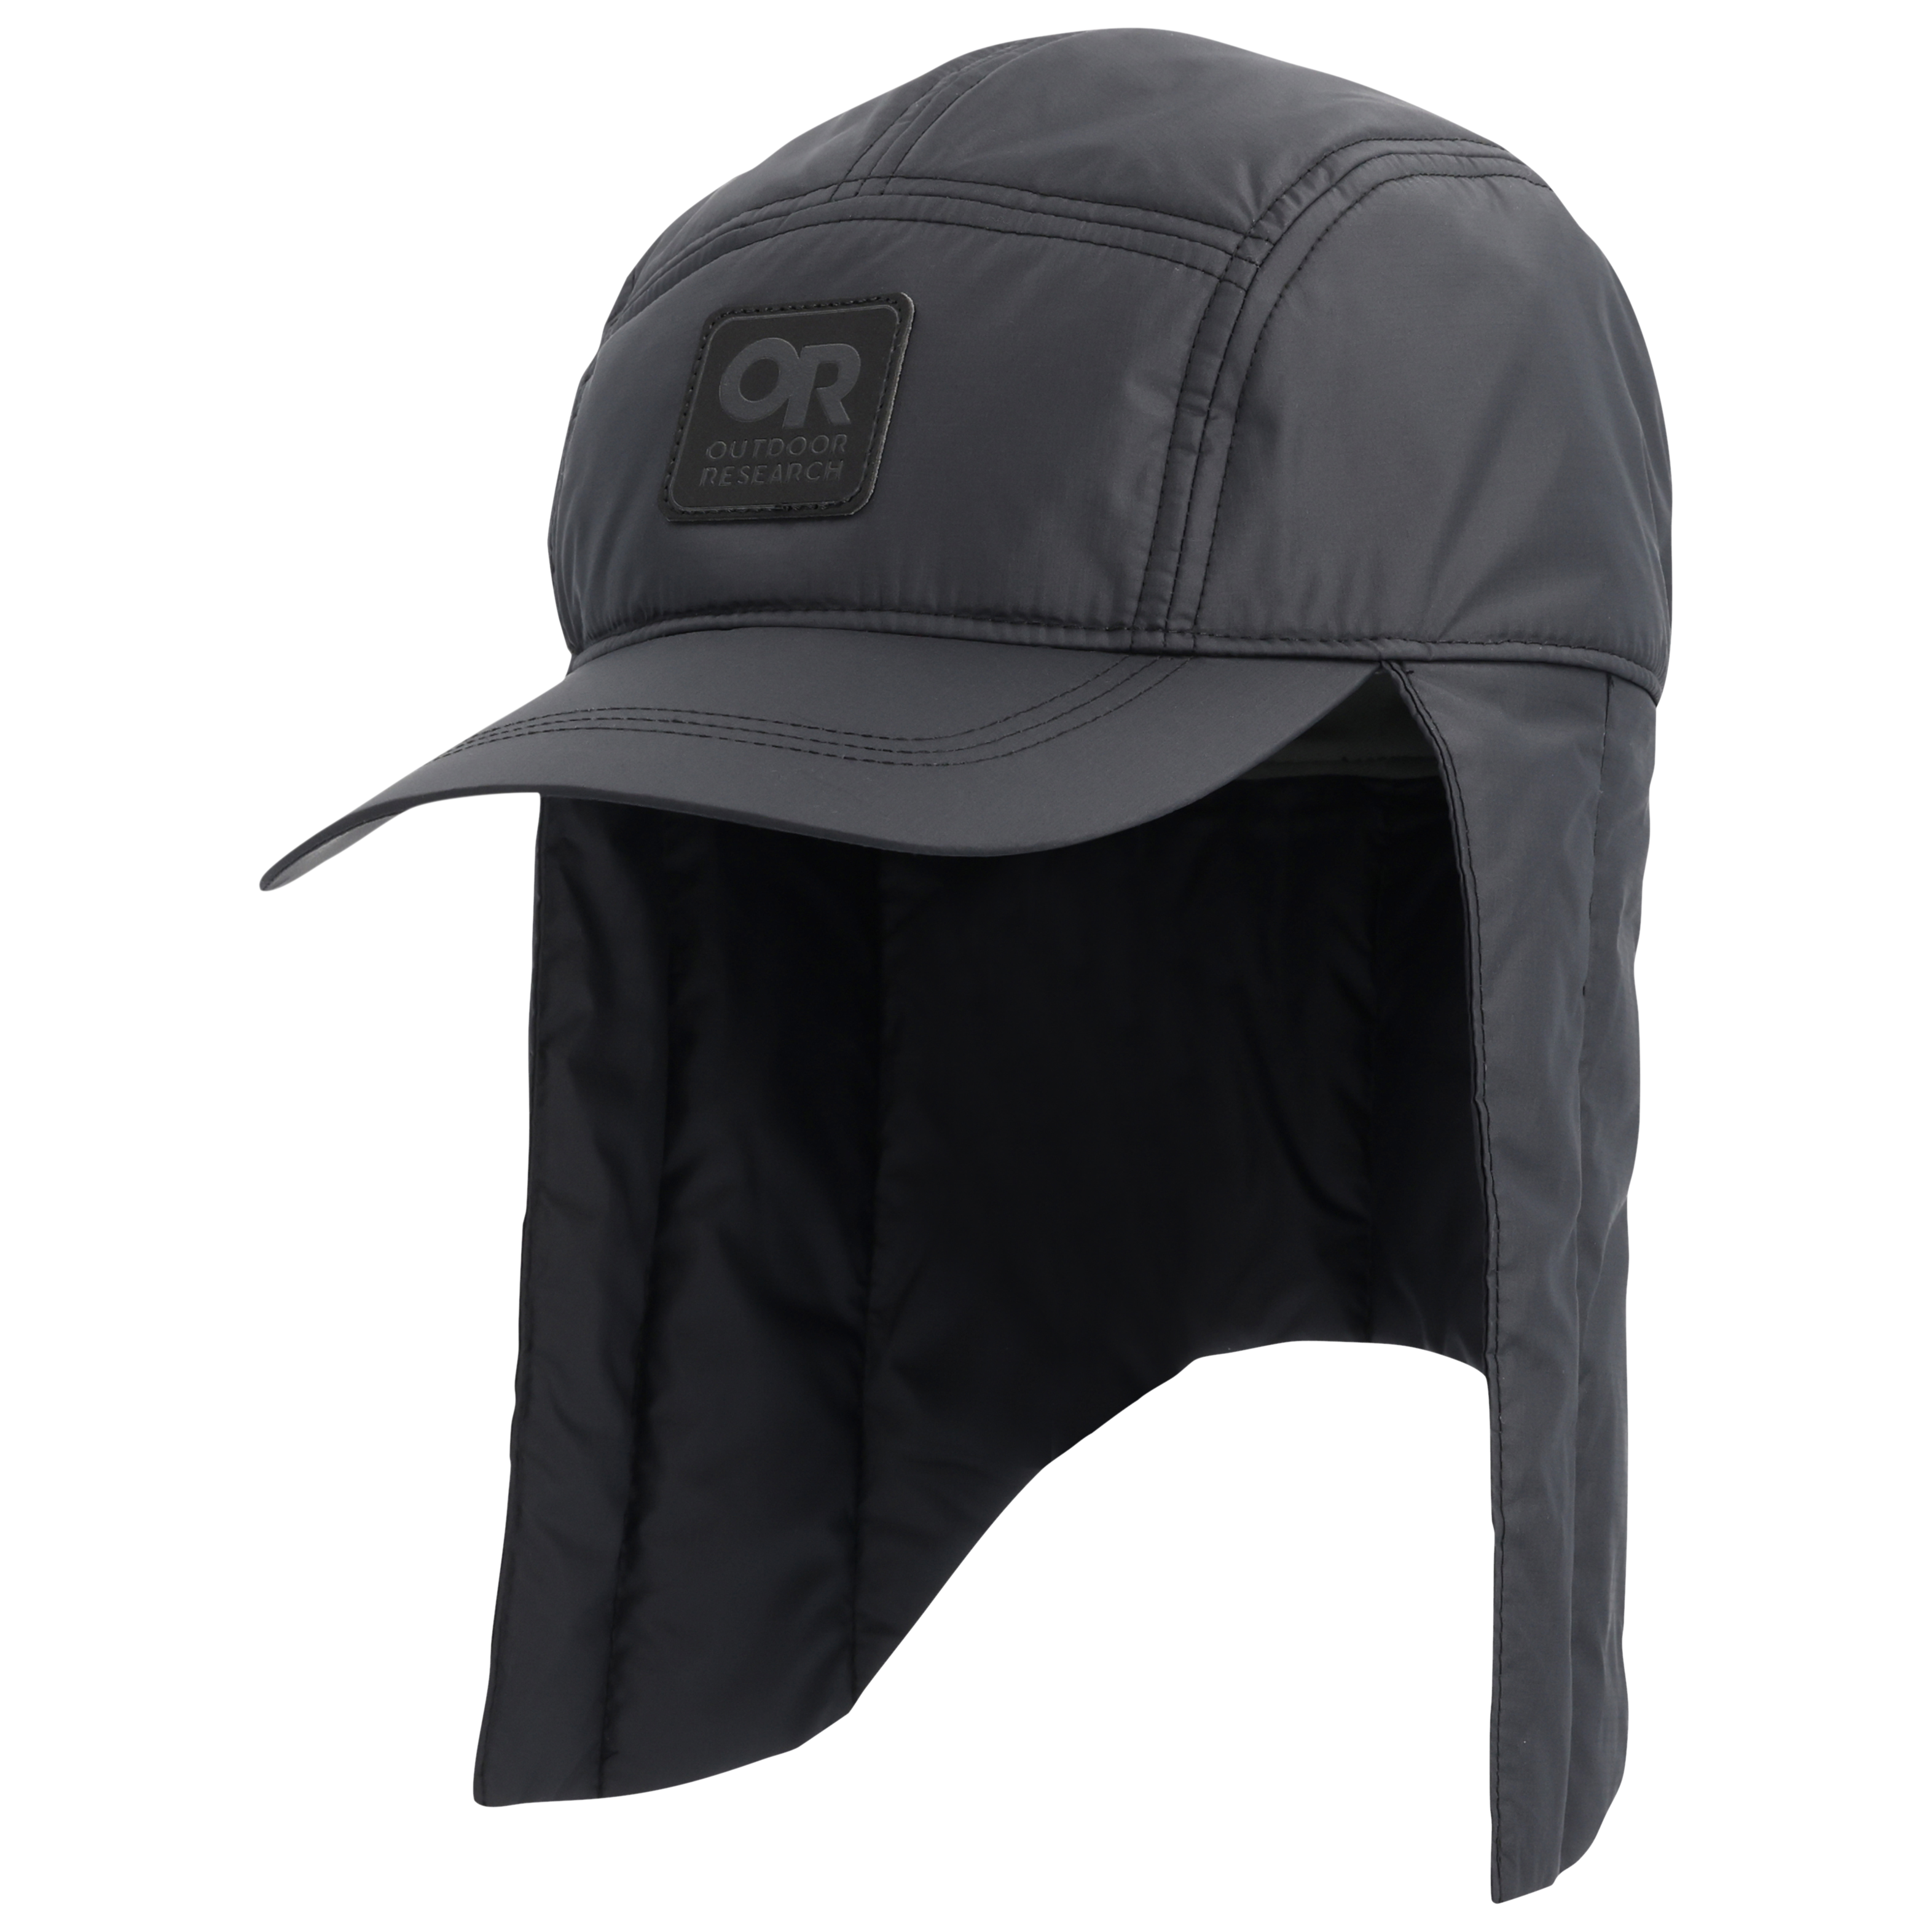 Outdoor Research Coldfront Insulated Cap - Black - S/M